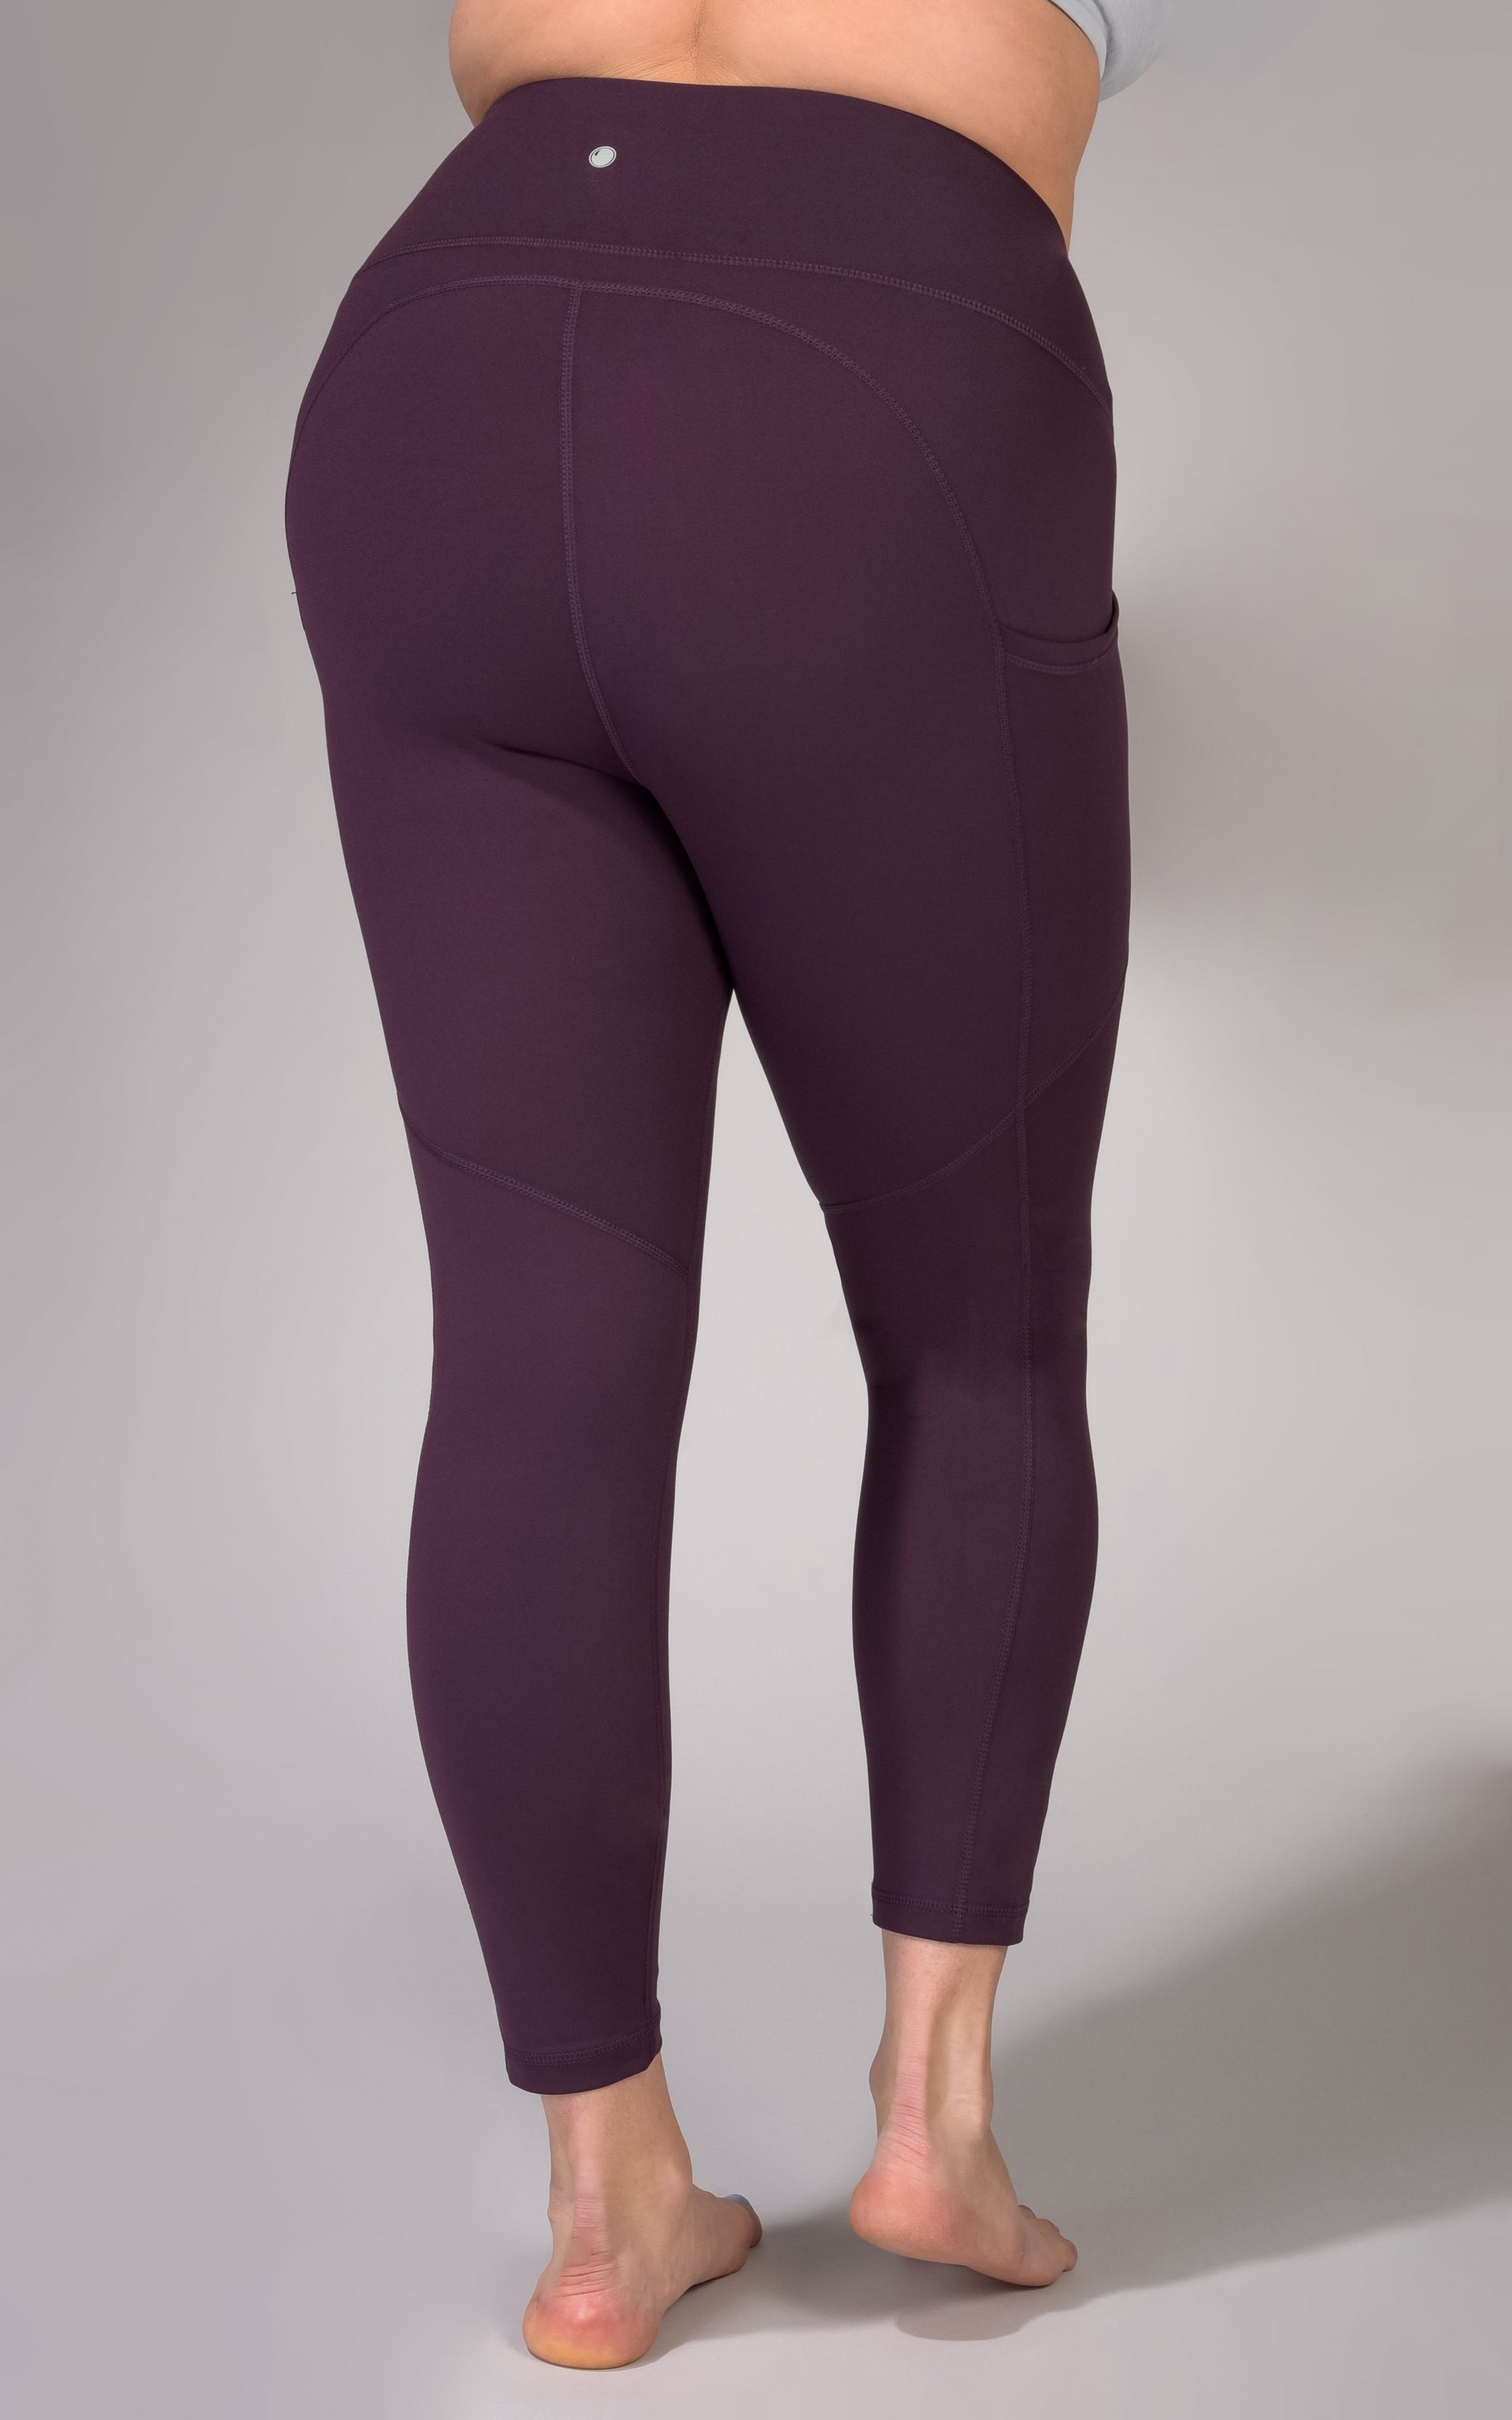 Yogalicious High Waisted Leggings 7/8 Purple Size XS - $20 - From Clare